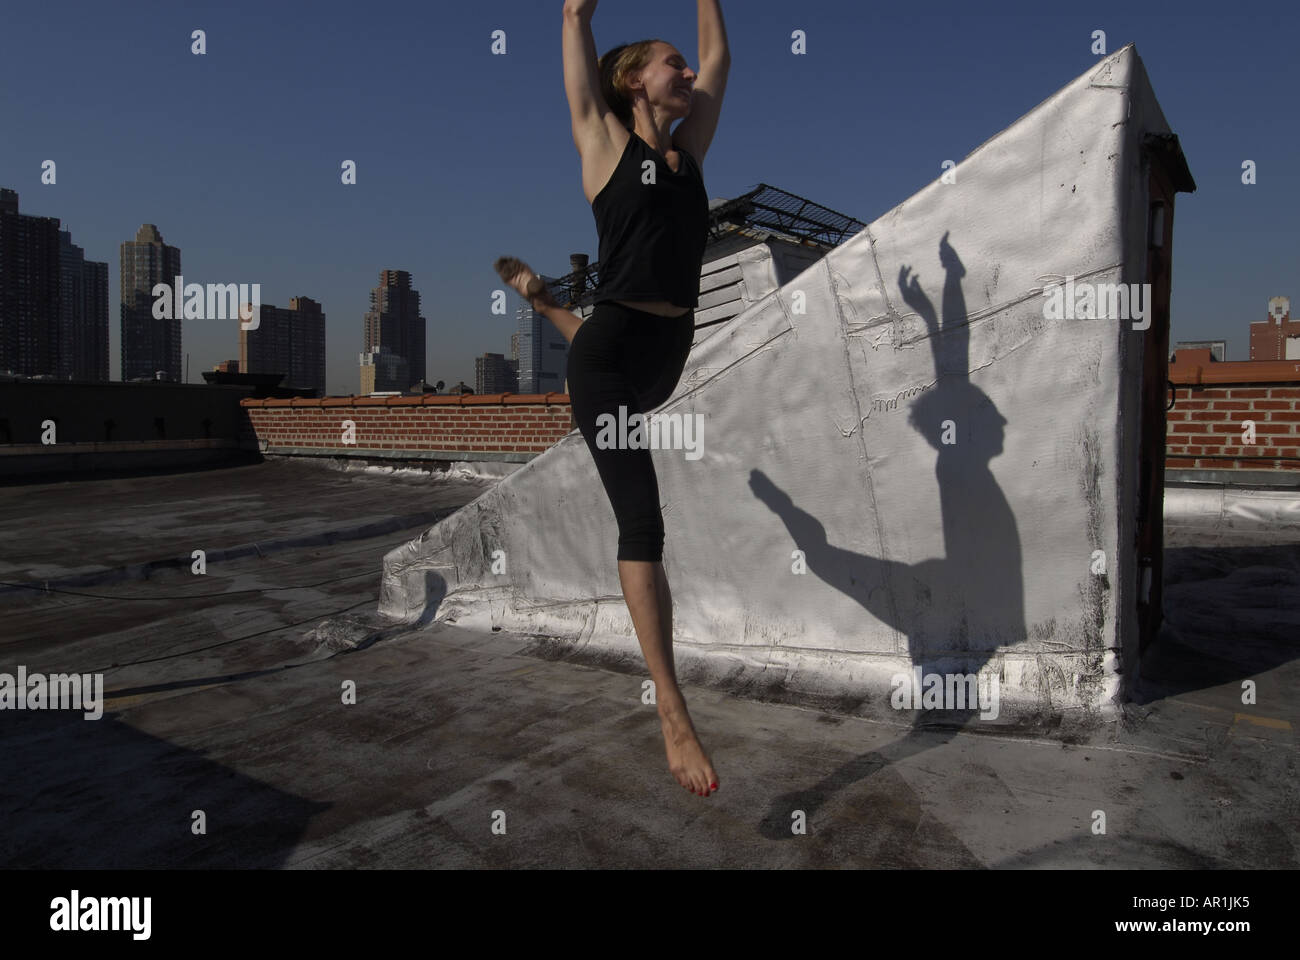 Model released New York CIty Thirty years old blond woman dancing on a building roof in a sunny morning in mid town Manhattan exercise healthy athletic strech strenching strong fit American health cardiac vascular lifestyle move movement power yogi twist mujer americana rubia ejercicio sana nueva y ork movimiento estiramiento salud medicina estilo de vida feliz saludable fuerte Stock Photo